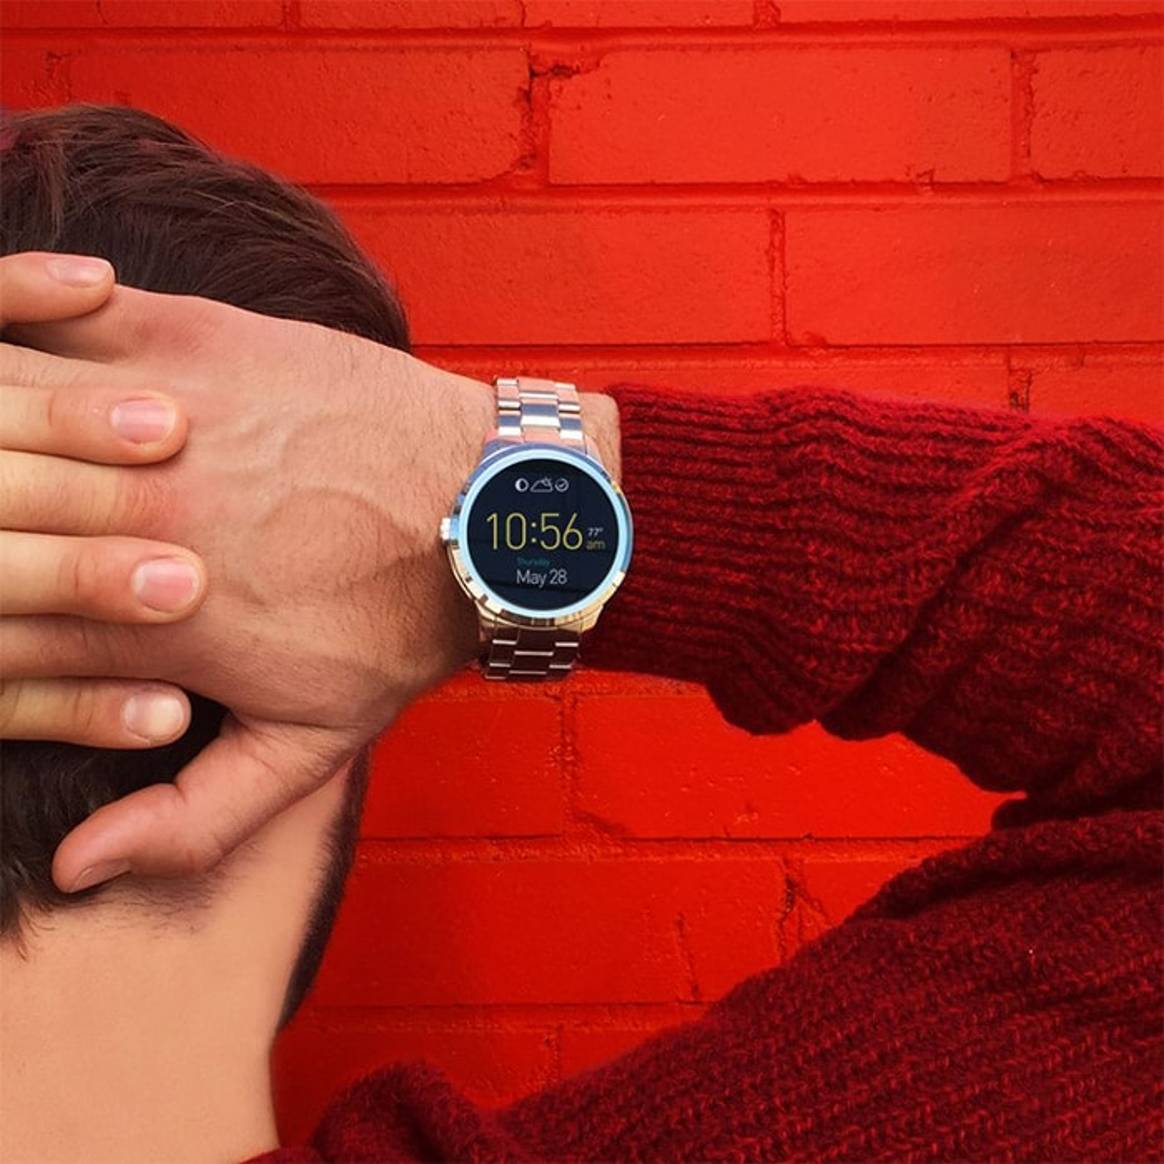 Fossil Group gears up to launch over 100 wearables in 2016